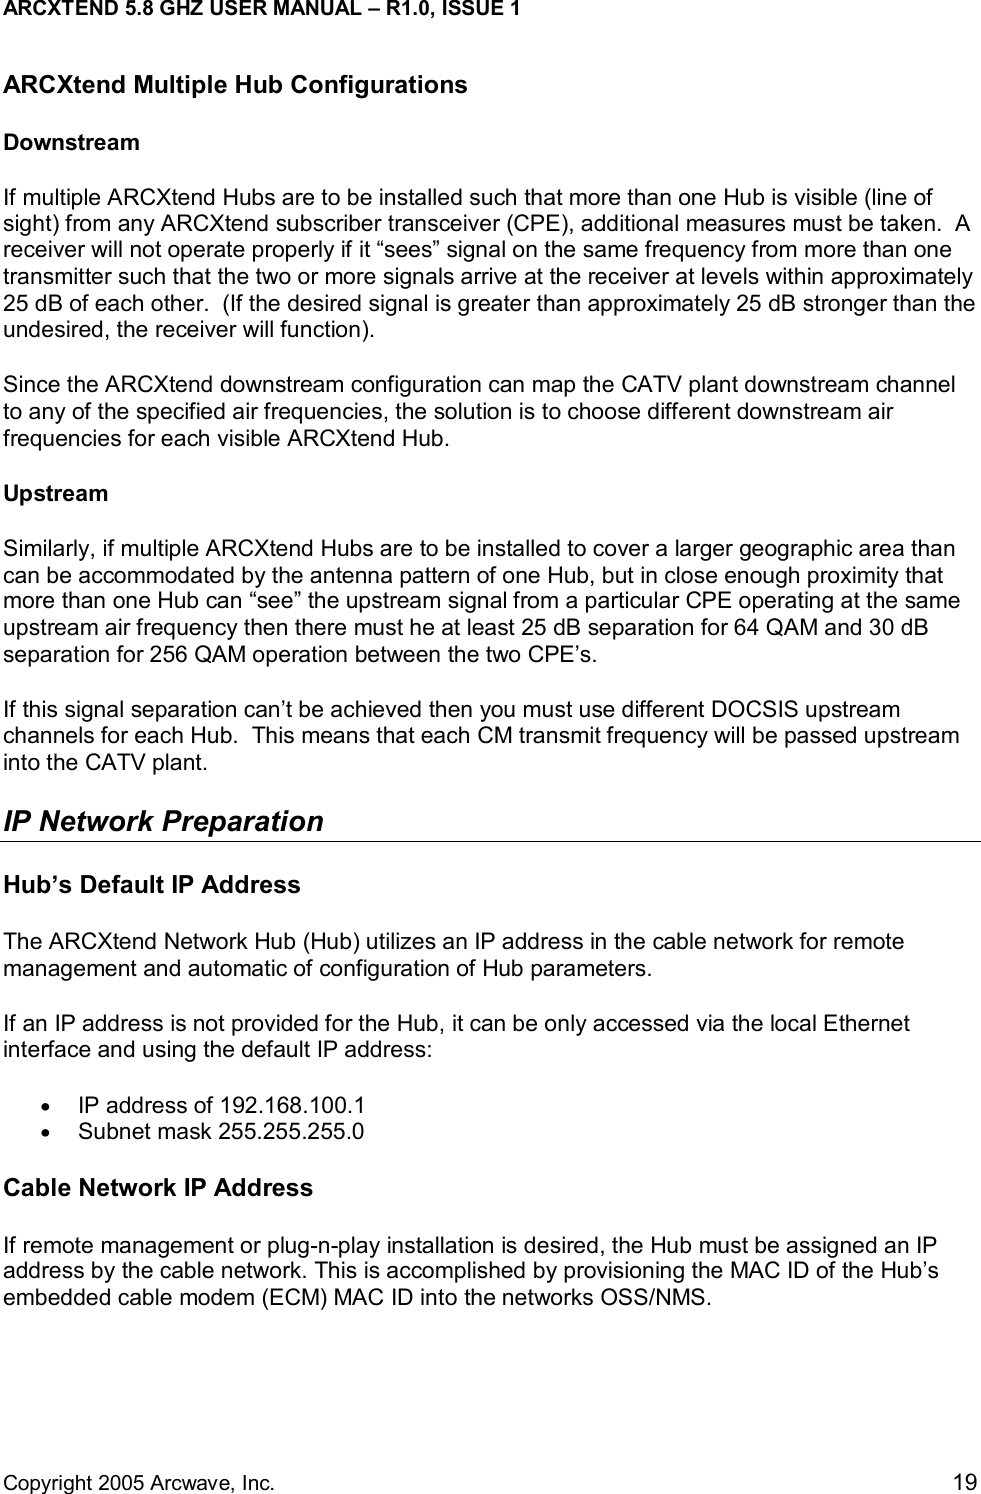 ARCXTEND 5.8 GHZ USER MANUAL – R1.0, ISSUE 1  Copyright 2005 Arcwave, Inc.    19 ARCXtend Multiple Hub Configurations Downstream If multiple ARCXtend Hubs are to be installed such that more than one Hub is visible (line of sight) from any ARCXtend subscriber transceiver (CPE), additional measures must be taken.  A receiver will not operate properly if it “sees” signal on the same frequency from more than one transmitter such that the two or more signals arrive at the receiver at levels within approximately 25 dB of each other.  (If the desired signal is greater than approximately 25 dB stronger than the undesired, the receiver will function). Since the ARCXtend downstream configuration can map the CATV plant downstream channel to any of the specified air frequencies, the solution is to choose different downstream air frequencies for each visible ARCXtend Hub.  Upstream Similarly, if multiple ARCXtend Hubs are to be installed to cover a larger geographic area than can be accommodated by the antenna pattern of one Hub, but in close enough proximity that more than one Hub can “see” the upstream signal from a particular CPE operating at the same upstream air frequency then there must he at least 25 dB separation for 64 QAM and 30 dB separation for 256 QAM operation between the two CPE’s. If this signal separation can’t be achieved then you must use different DOCSIS upstream channels for each Hub.  This means that each CM transmit frequency will be passed upstream into the CATV plant.   IP Network Preparation Hub’s Default IP Address The ARCXtend Network Hub (Hub) utilizes an IP address in the cable network for remote management and automatic of configuration of Hub parameters.  If an IP address is not provided for the Hub, it can be only accessed via the local Ethernet interface and using the default IP address: •  IP address of 192.168.100.1  •  Subnet mask 255.255.255.0 Cable Network IP Address If remote management or plug-n-play installation is desired, the Hub must be assigned an IP address by the cable network. This is accomplished by provisioning the MAC ID of the Hub’s embedded cable modem (ECM) MAC ID into the networks OSS/NMS.  